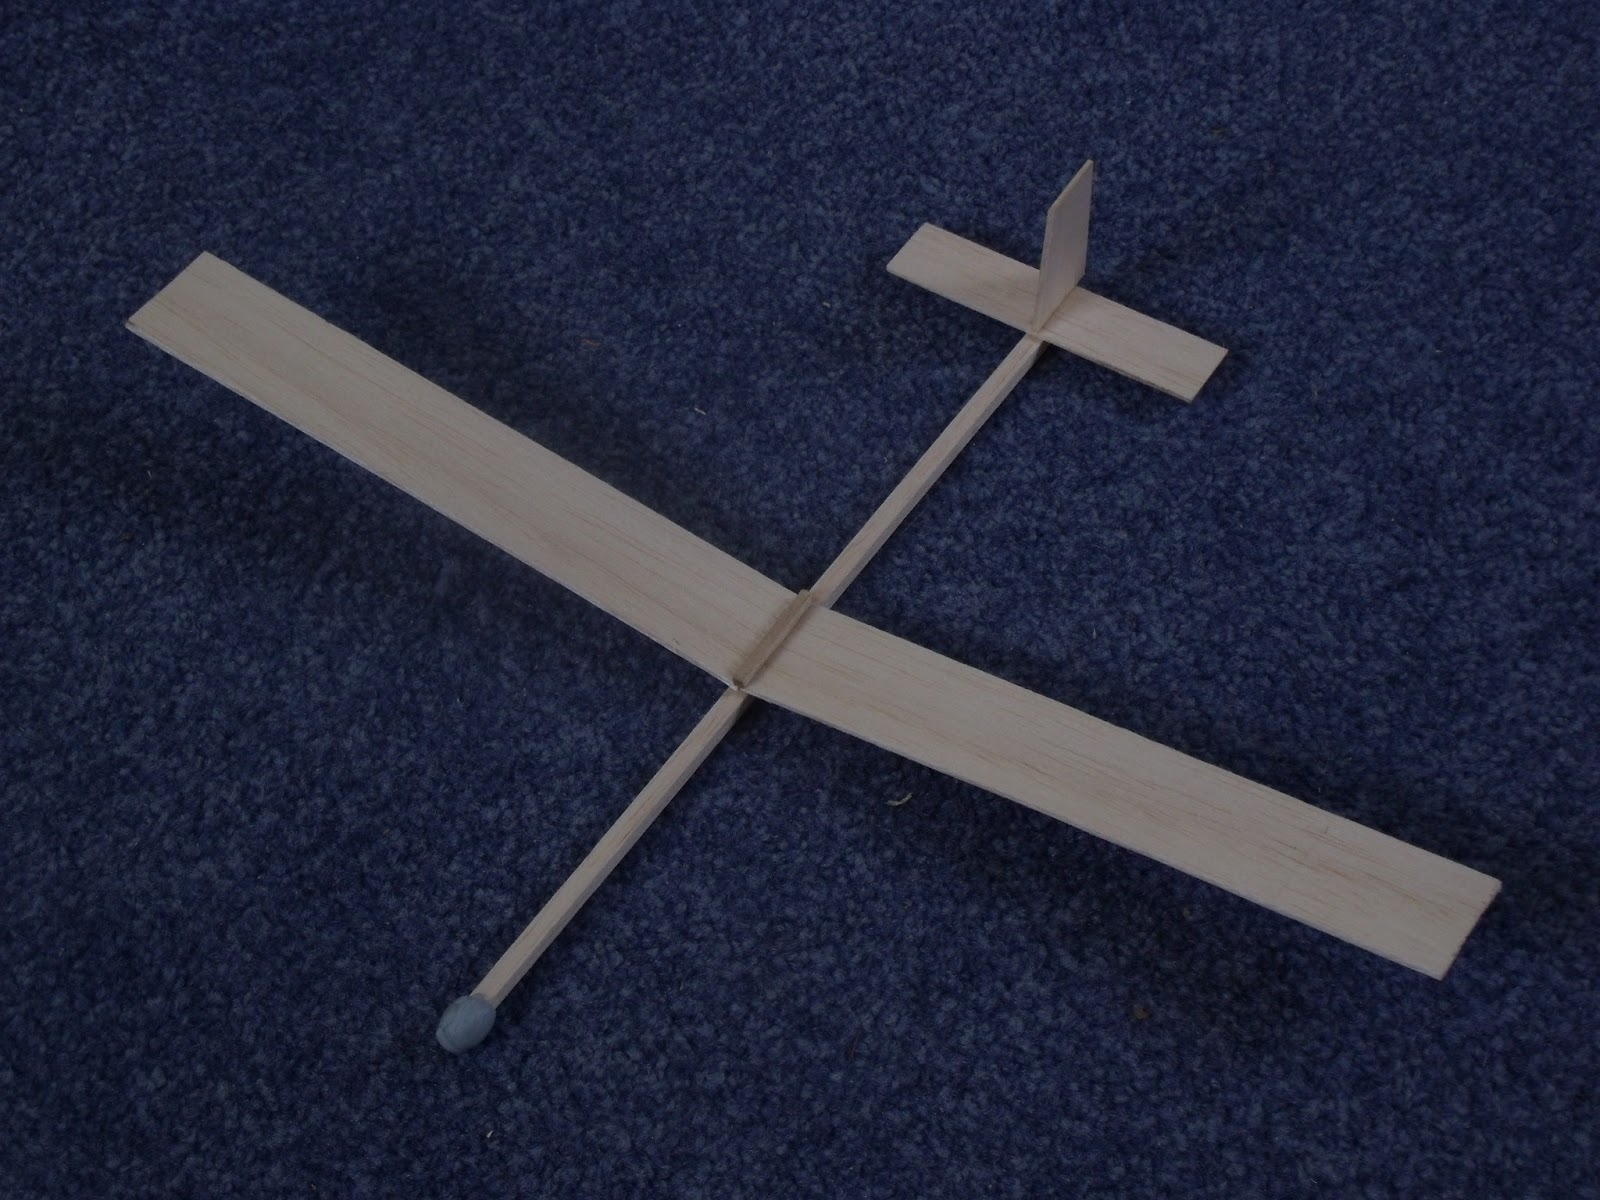 how to build a balsa wood glider